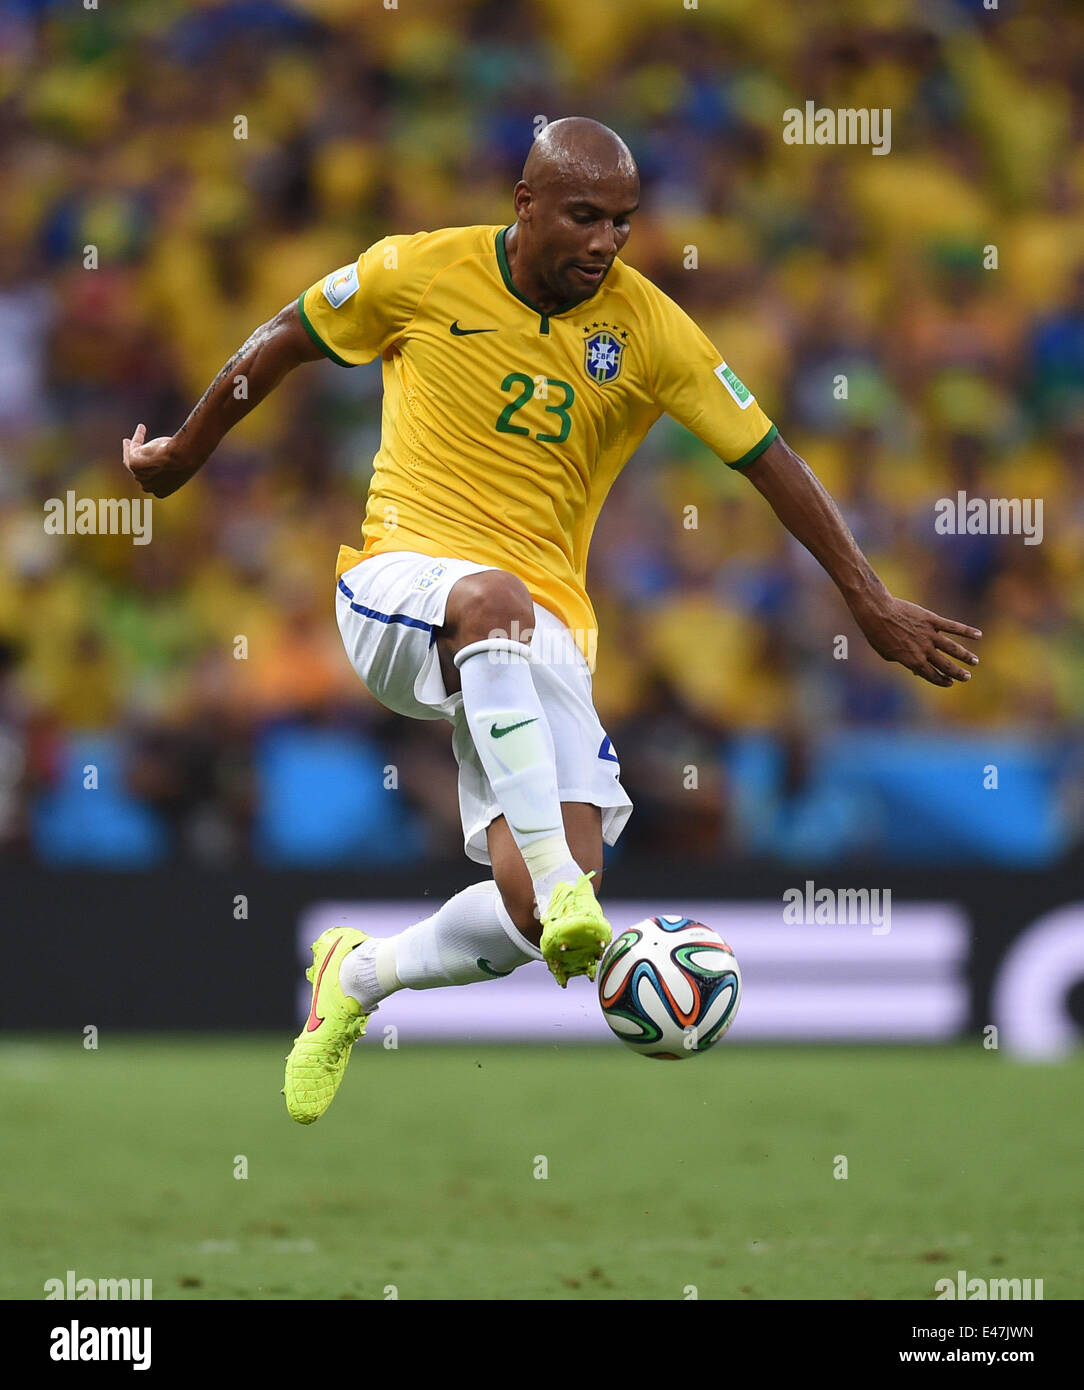 Fortaleza, Brazil. 04th July, 2014. Maicon of Brazil in action during the FIFA World Cup 2014 quarter final match soccer between Brazil and Colombia at the Estadio Castelao in Fortaleza, Brazil, 04 July 2014. Photo: Marius Becker/dpa/Alamy Live News Stock Photo